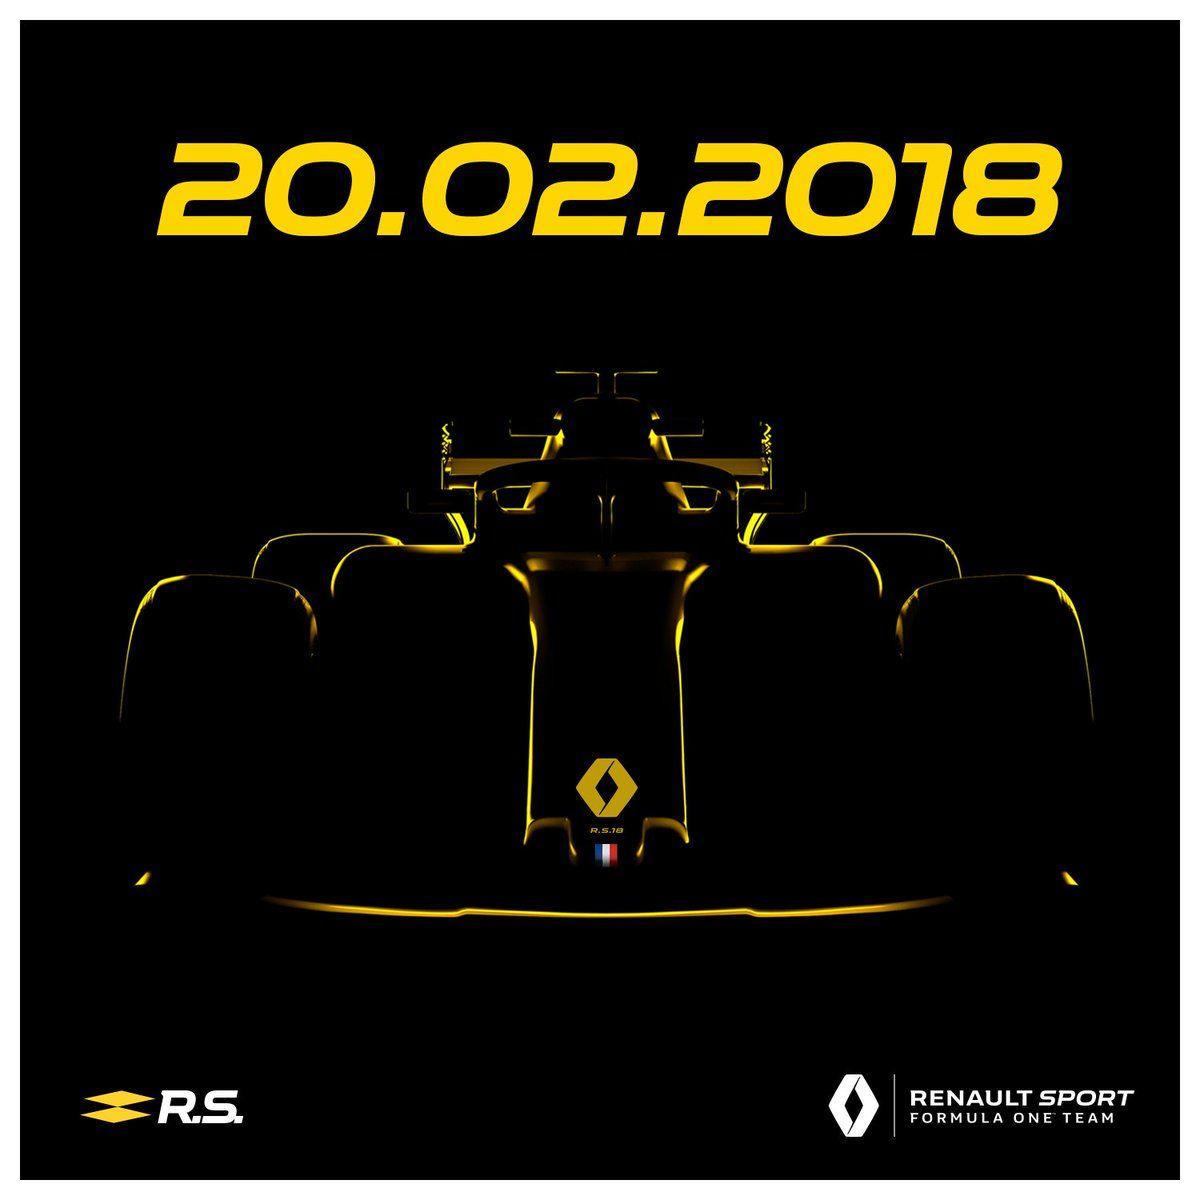 Renault F1 2018 Logo - Renault F1 Team rumours were true. The covers